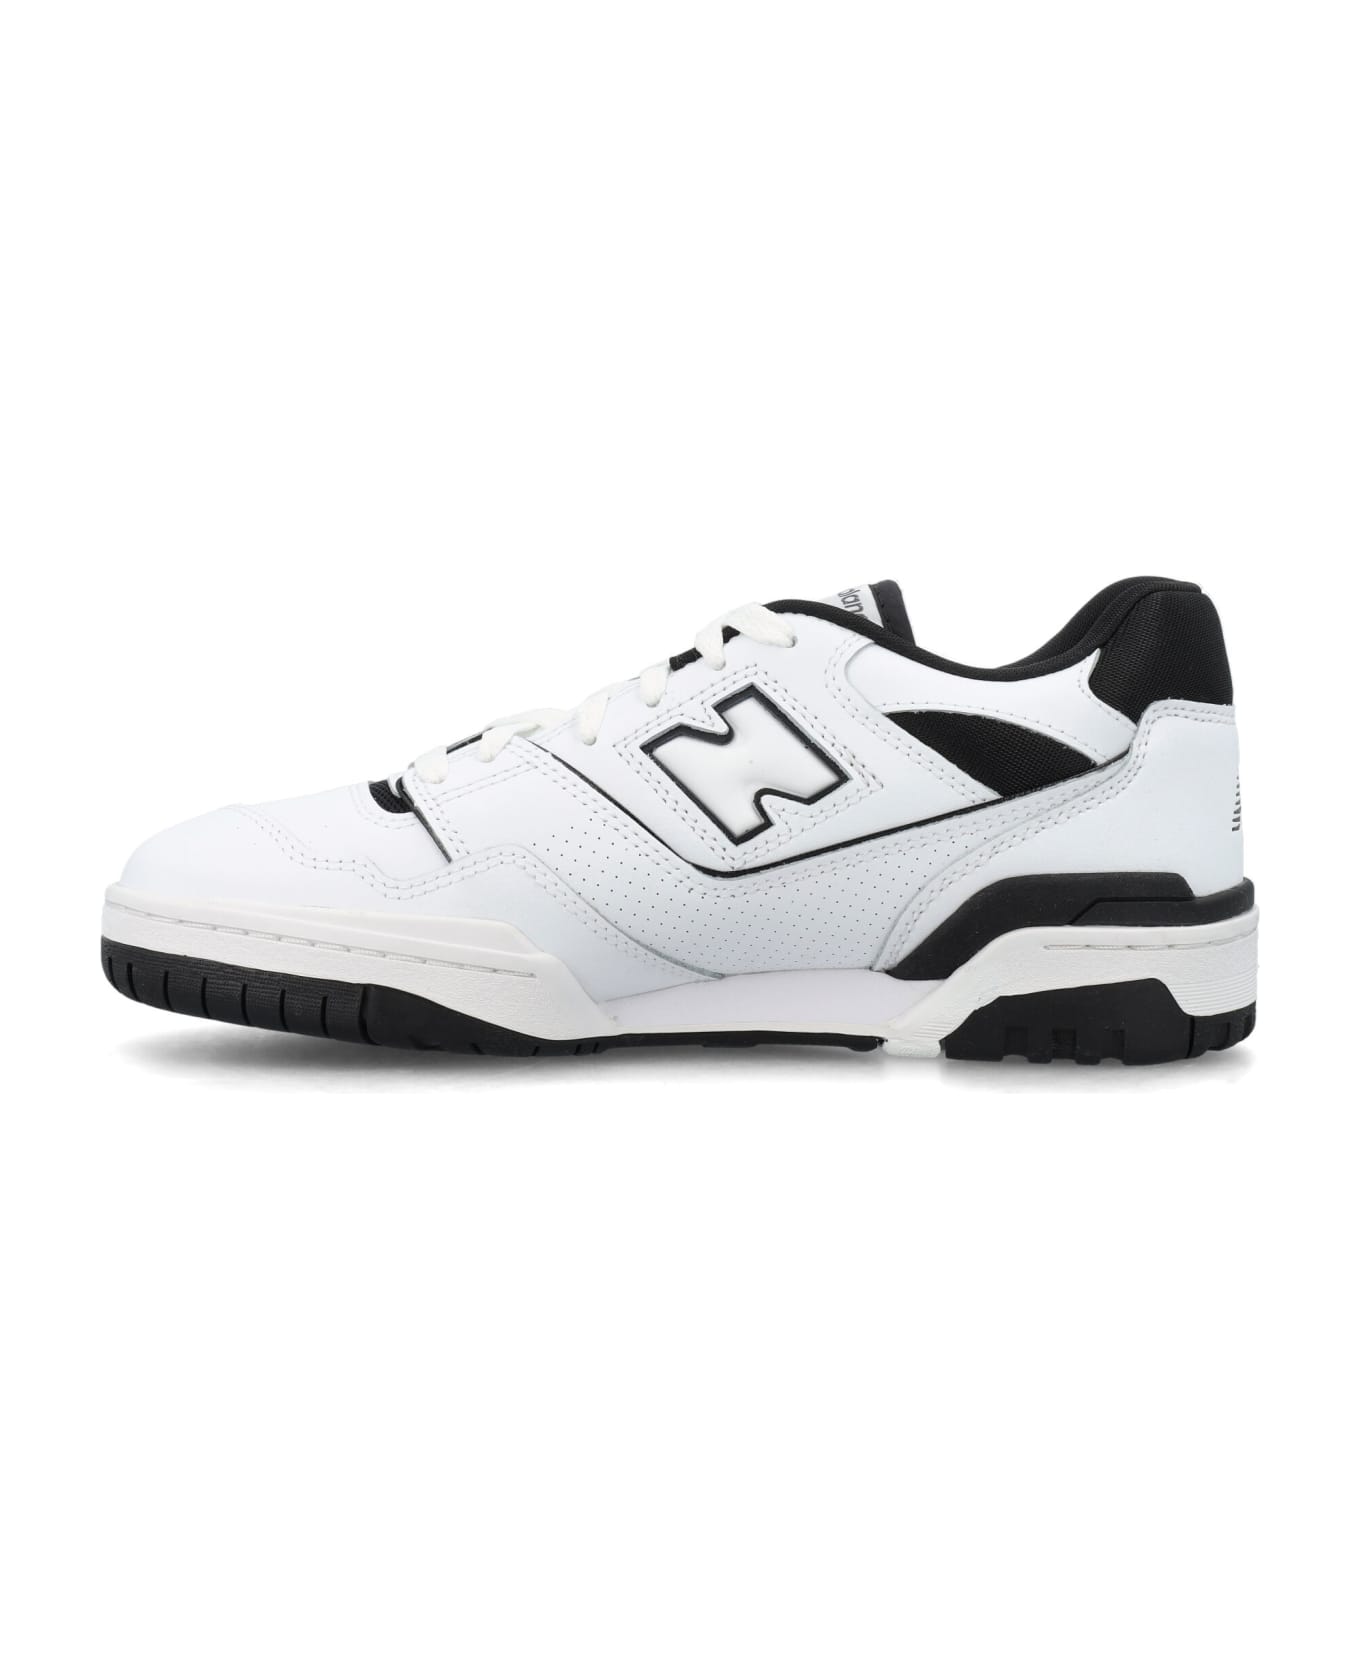 New Balance 550 Low Top Sneakers スニーカー